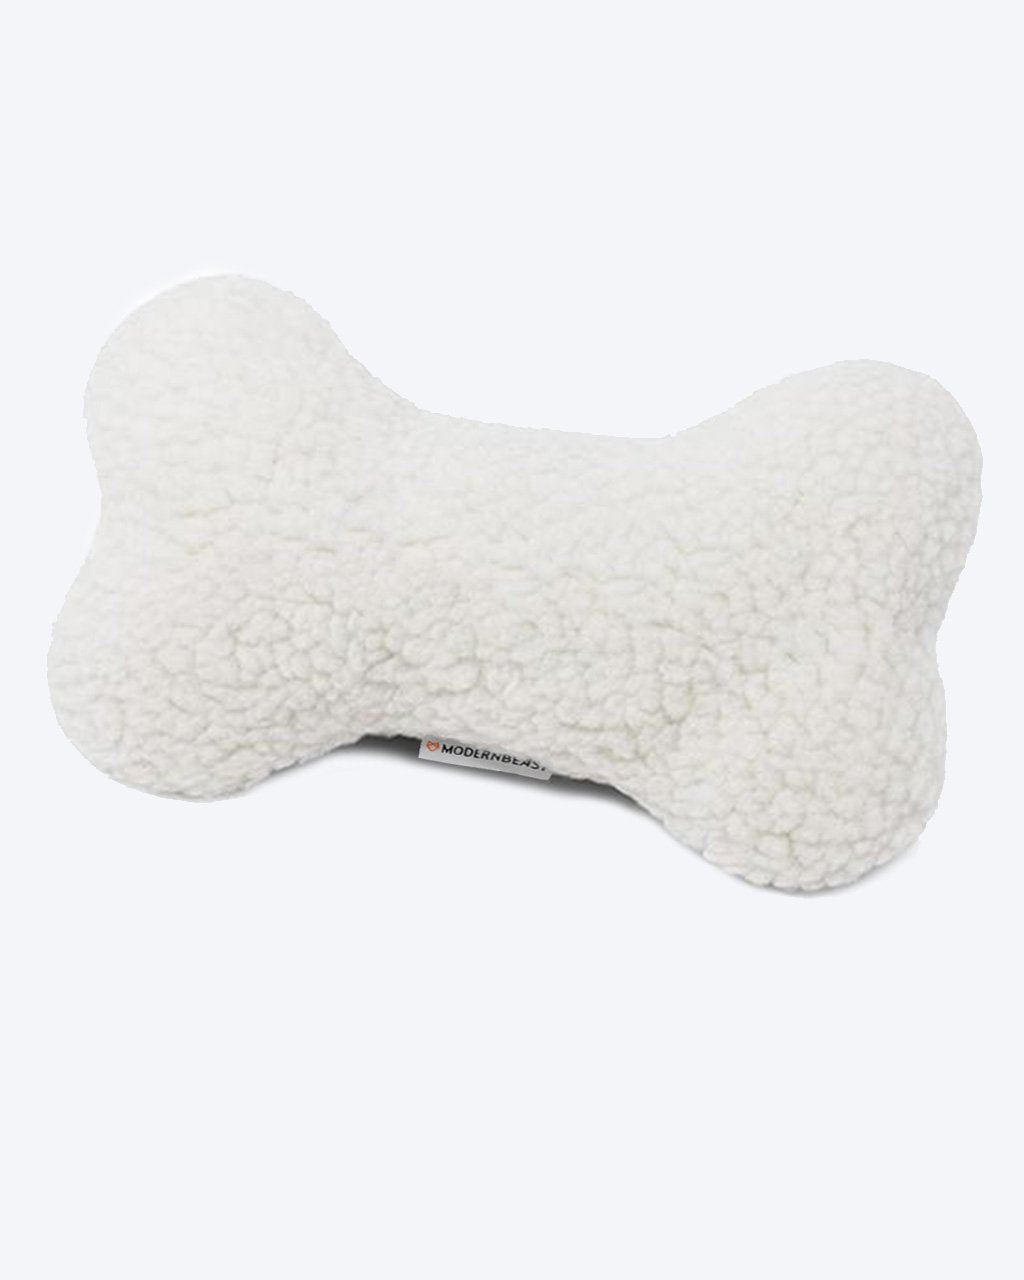 A fluffy white bone-shaped pillow designed for dogs, featuring a soft, textured fabric. The pillow has a visible label on the front with the brand name "MODERNBEAST Zenbone.